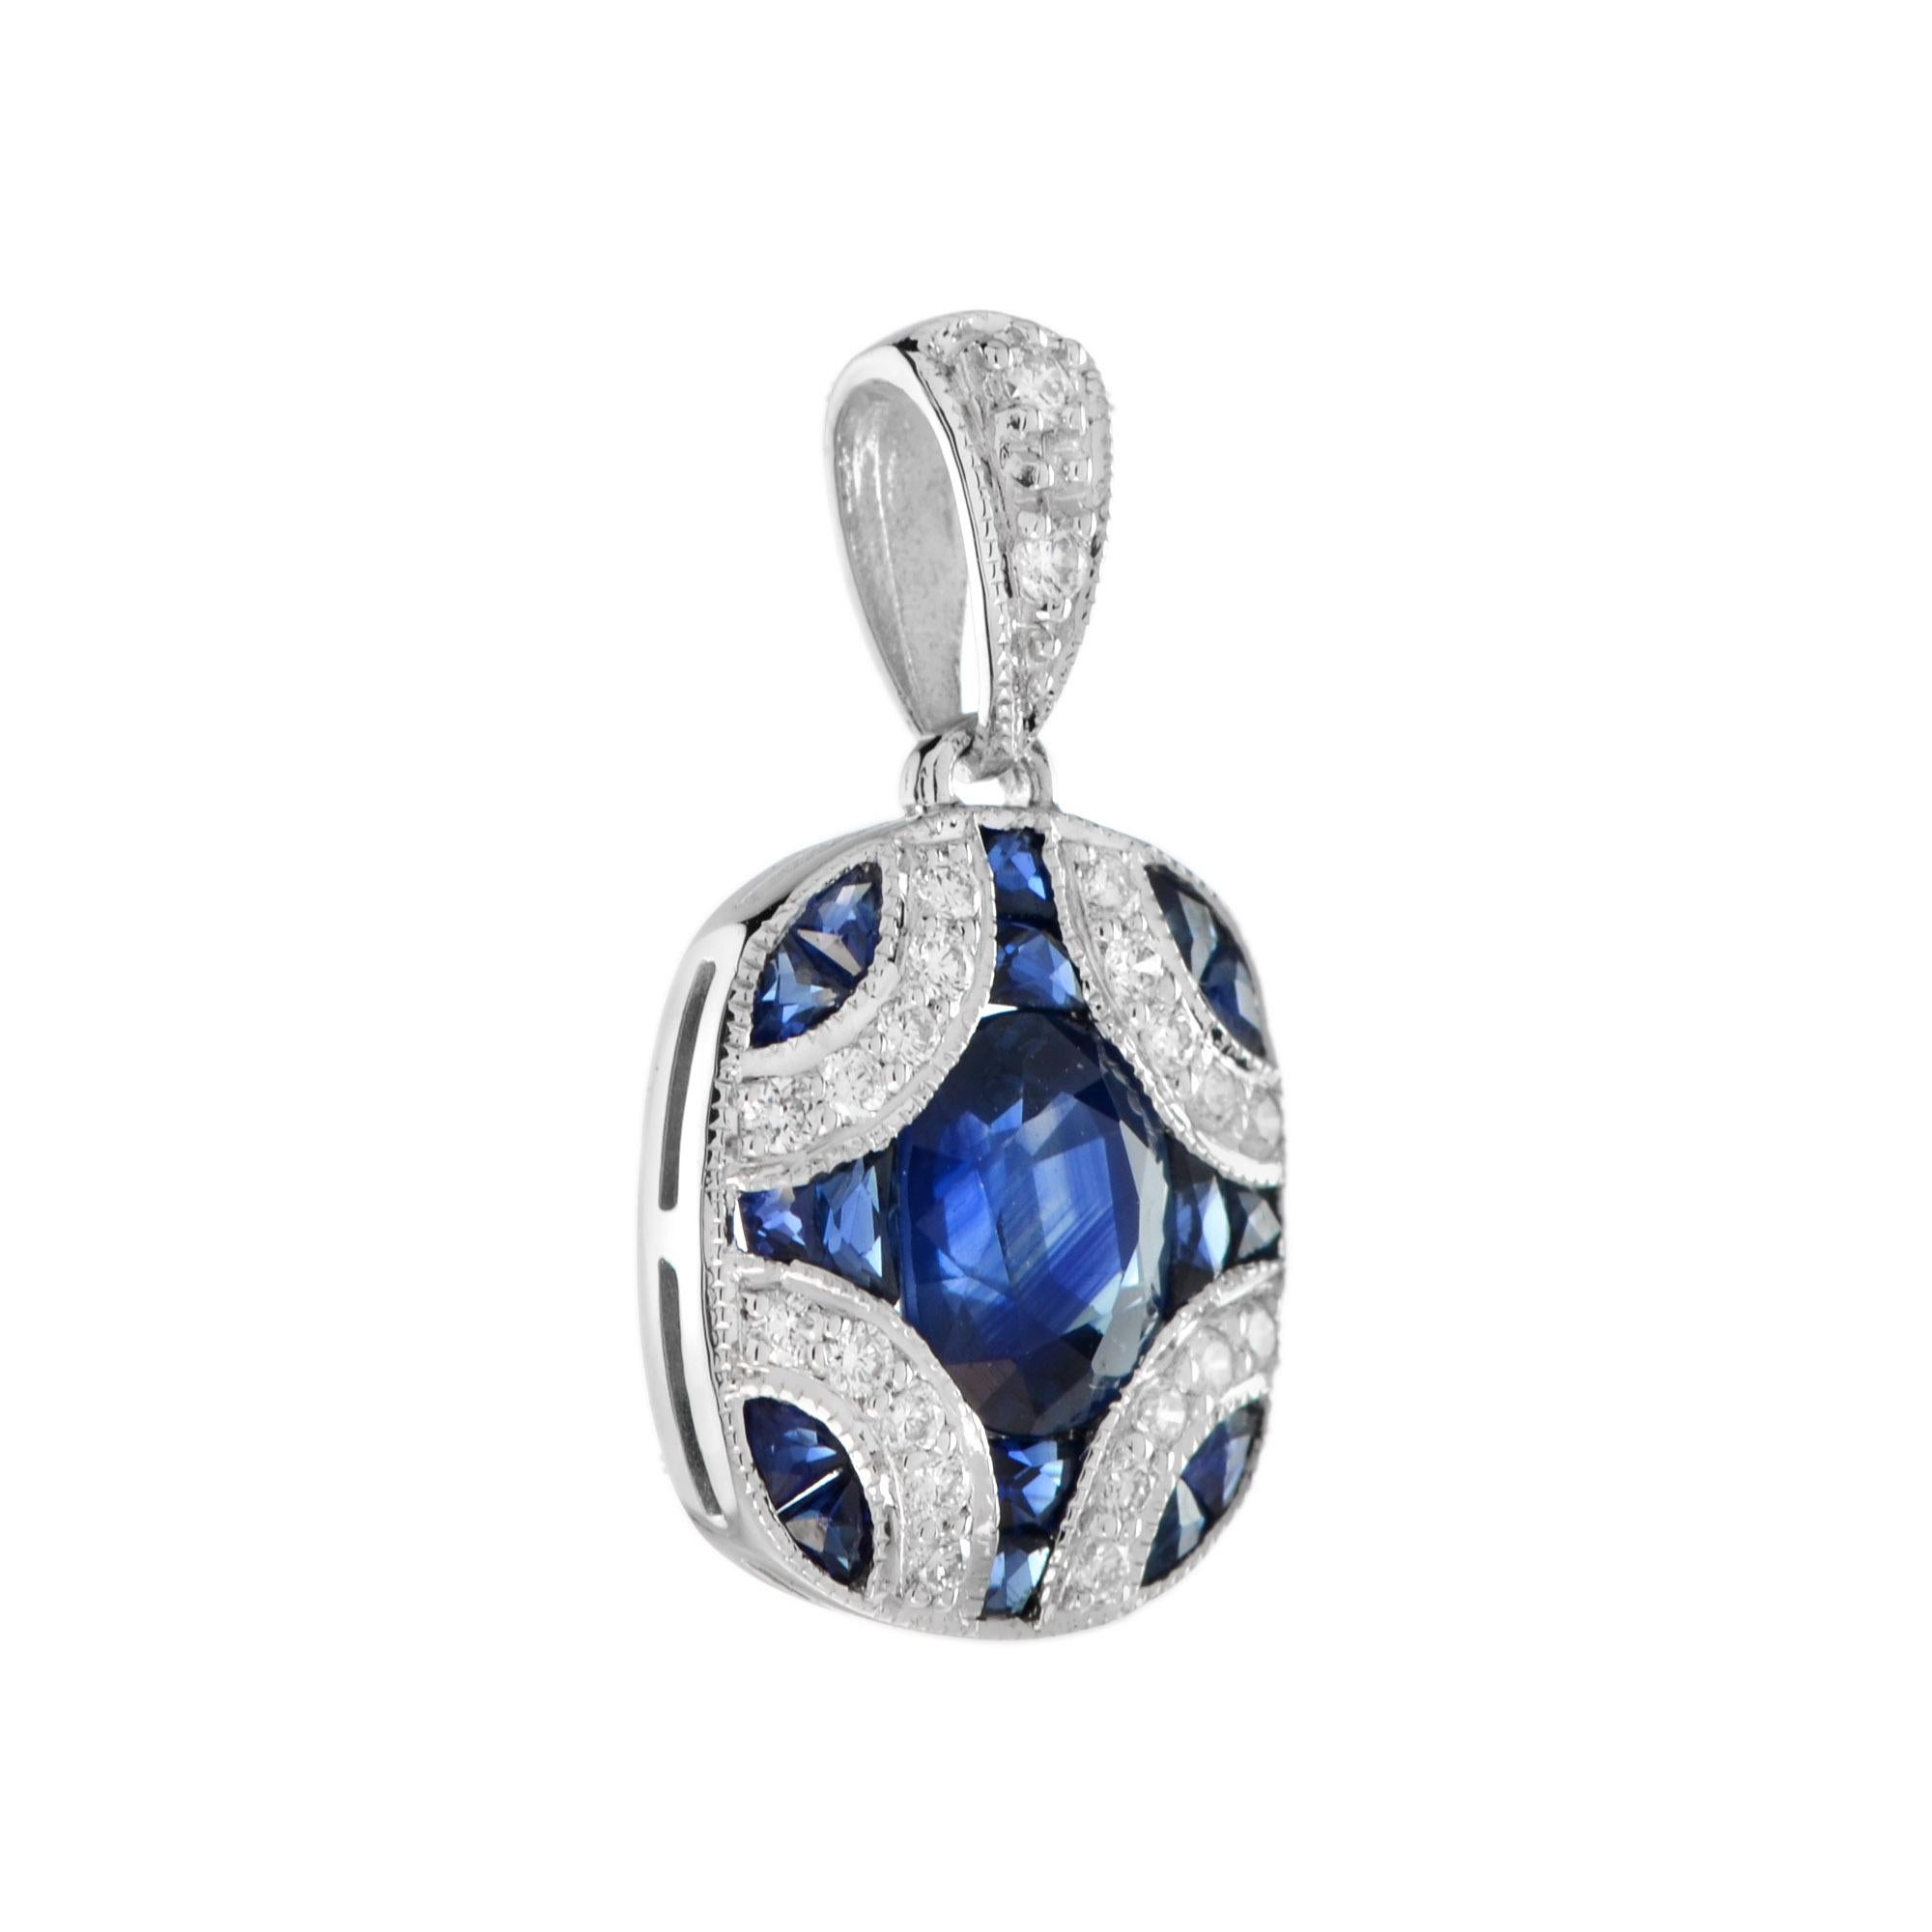 White gold sapphire and diamond Art Deco-inspired pendant with seventeen sapphires totaling 2.55 carats. This design features an oval cut sapphire center with adjacent French cut sapphire and round white diamonds totaling 0.13